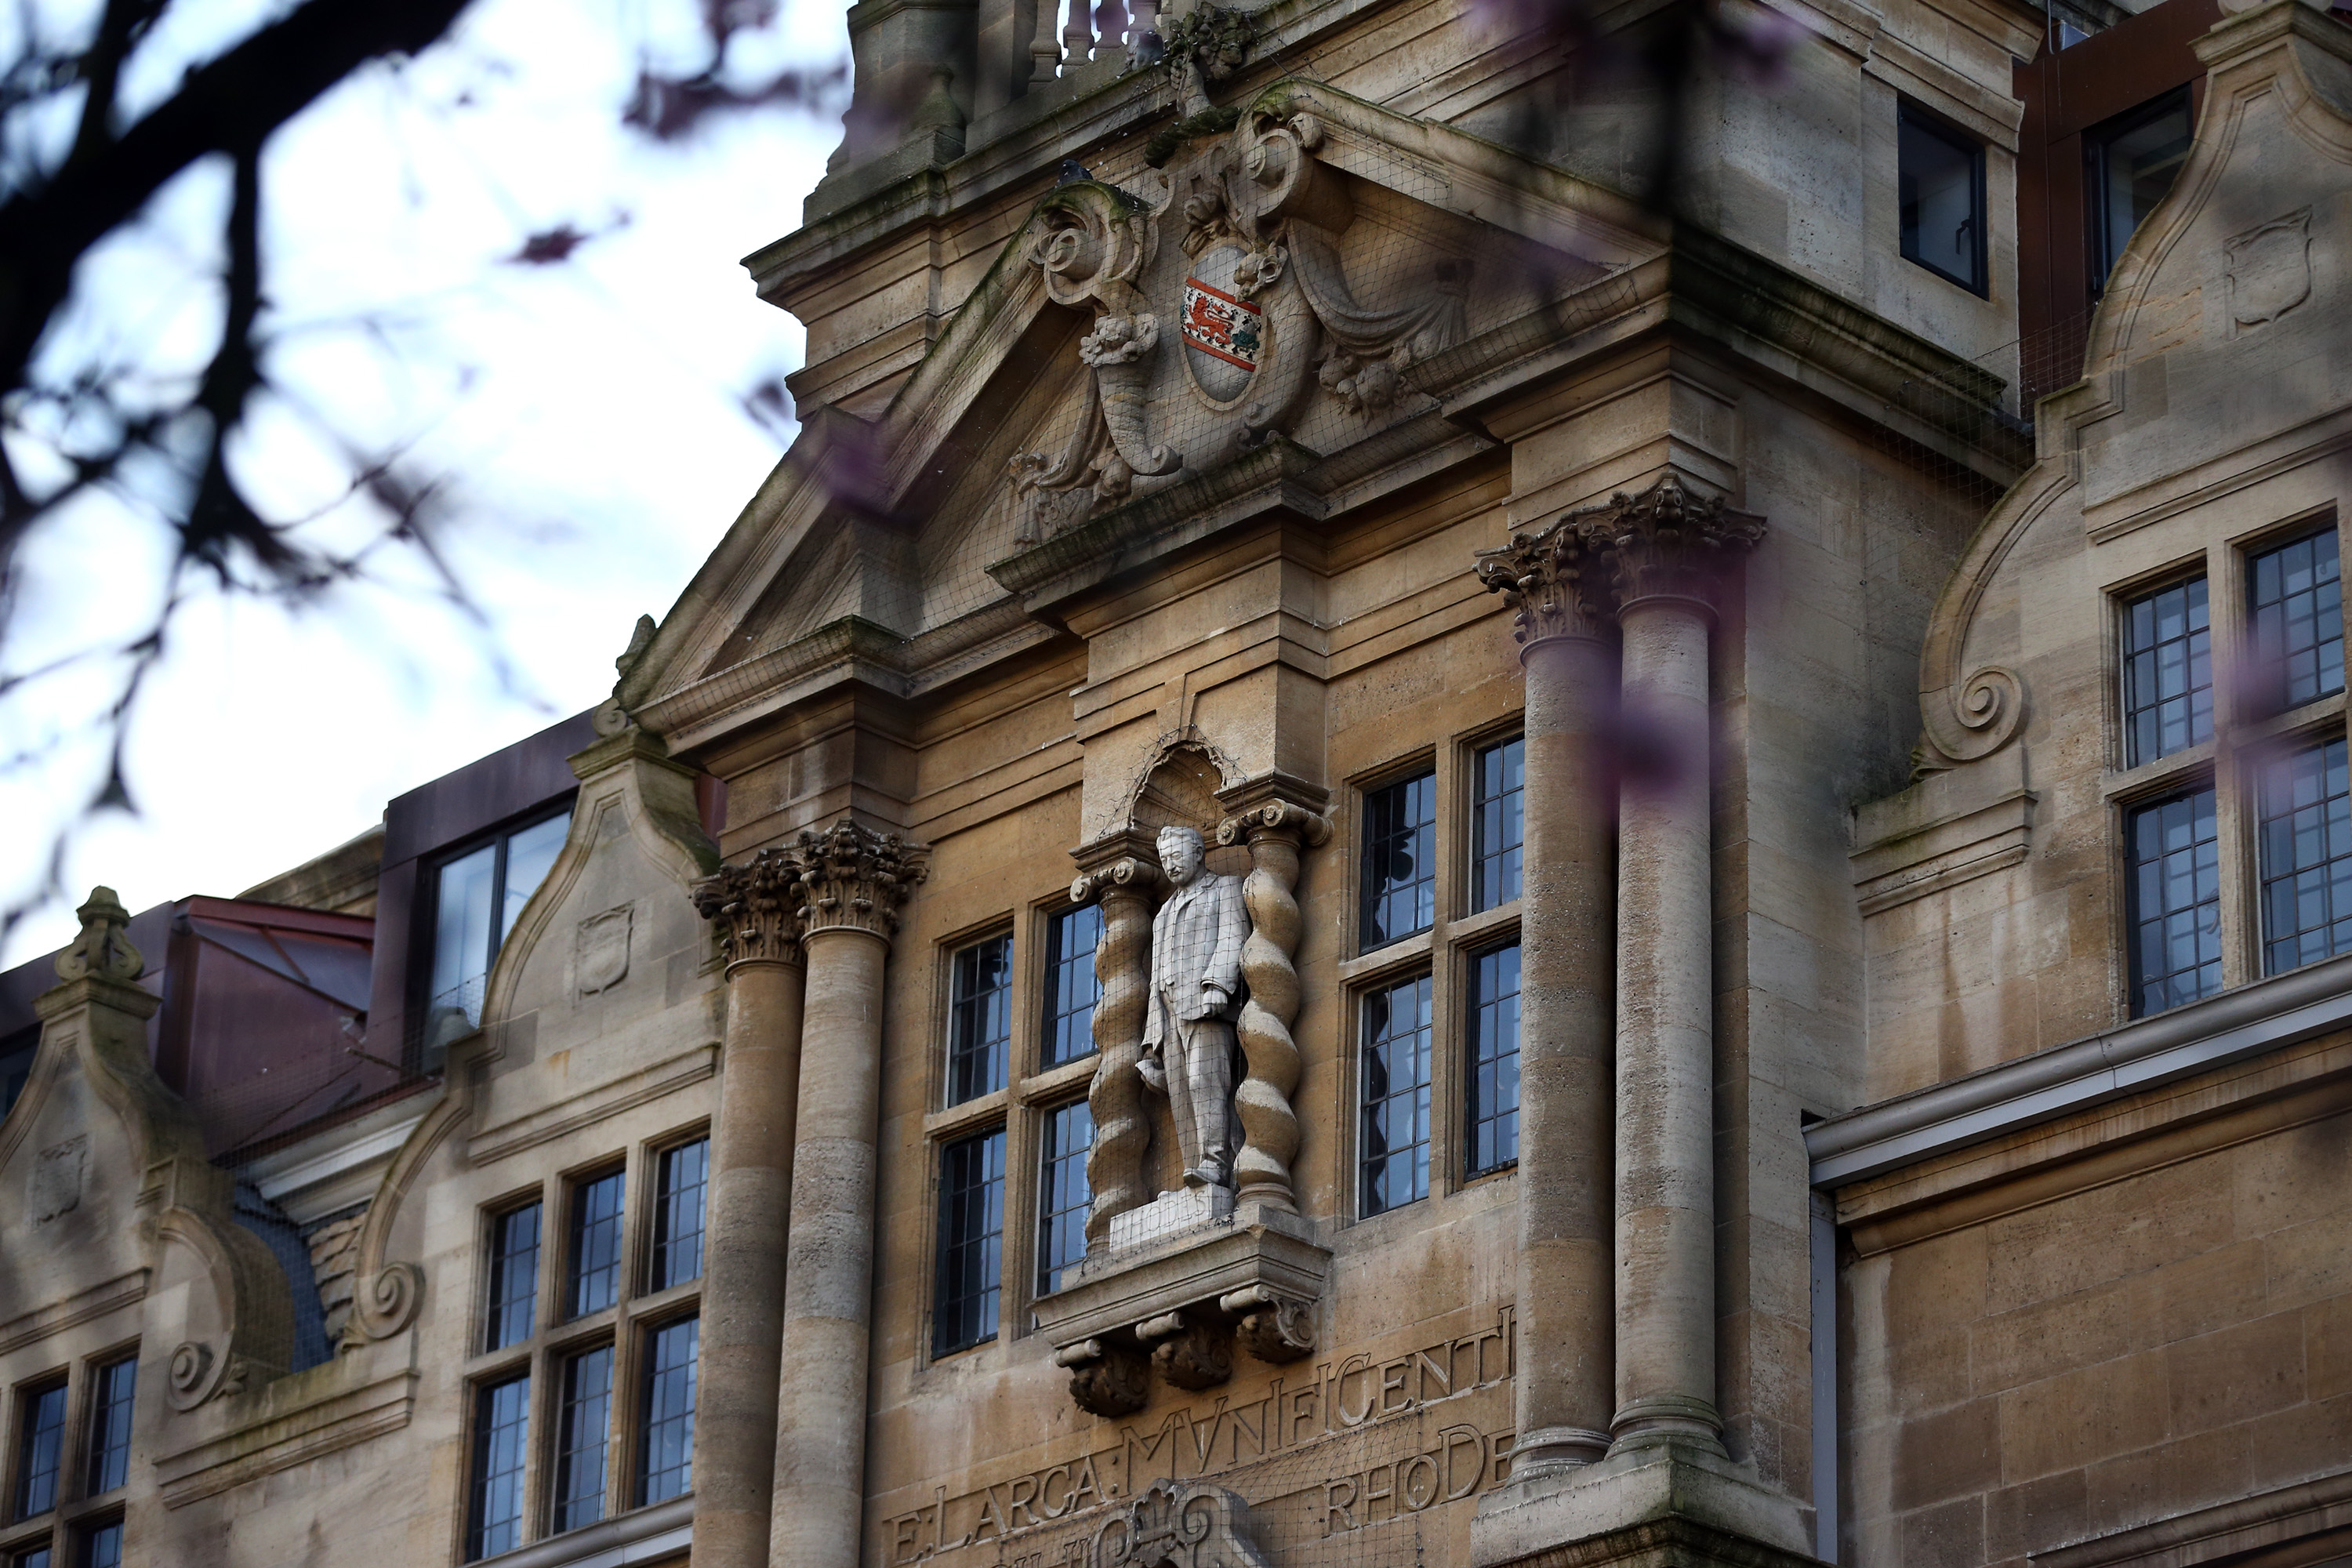 A statue of Cecil Rhodes is seen at Oriel College on February 2, 2016 in Oxford University, England. (Carl Court—Getty Images)